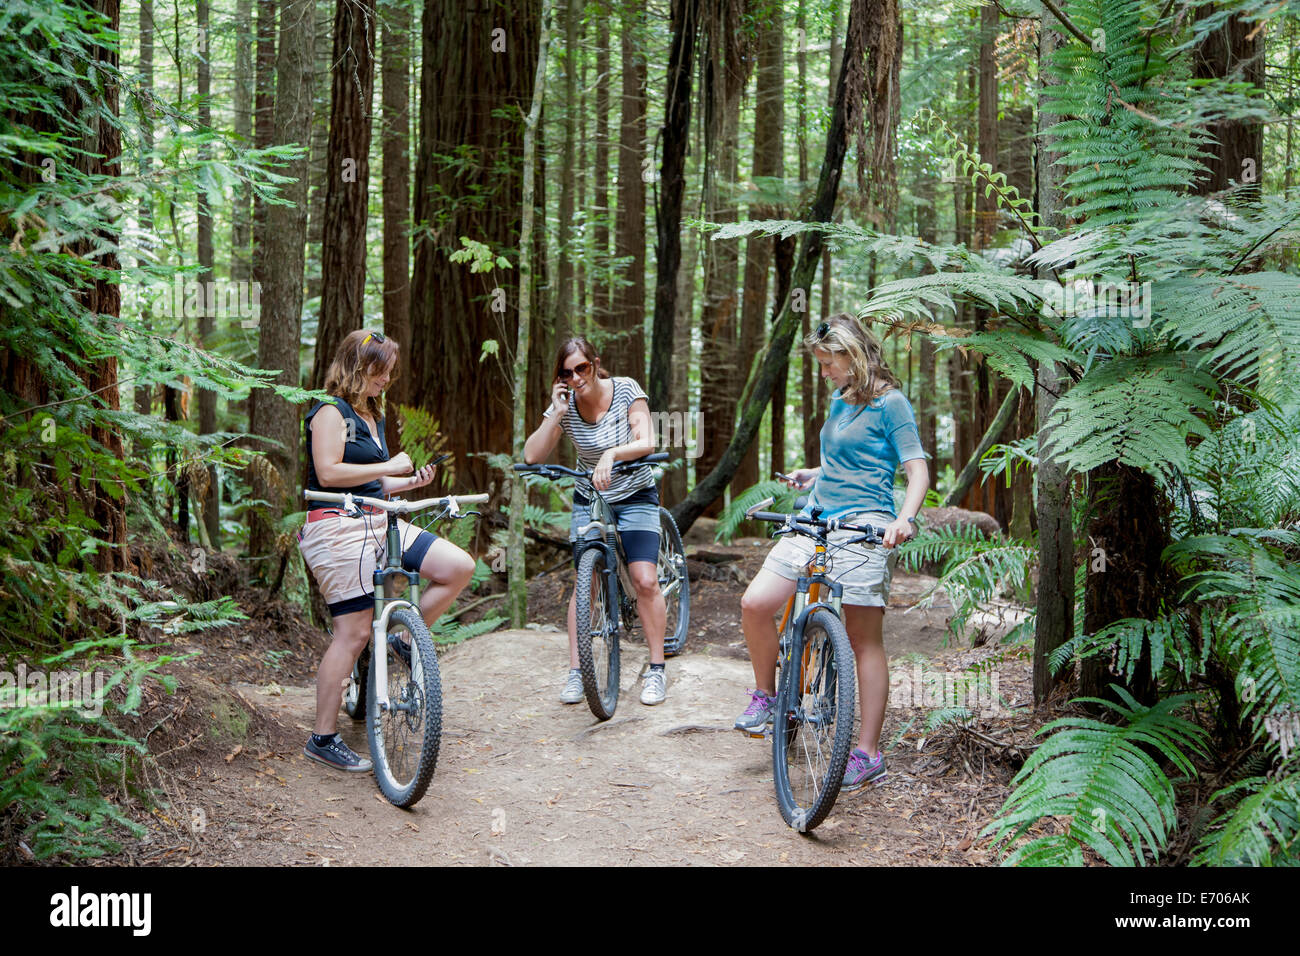 Three mid adult women mountain bikers using smartphones in forest Stock Photo